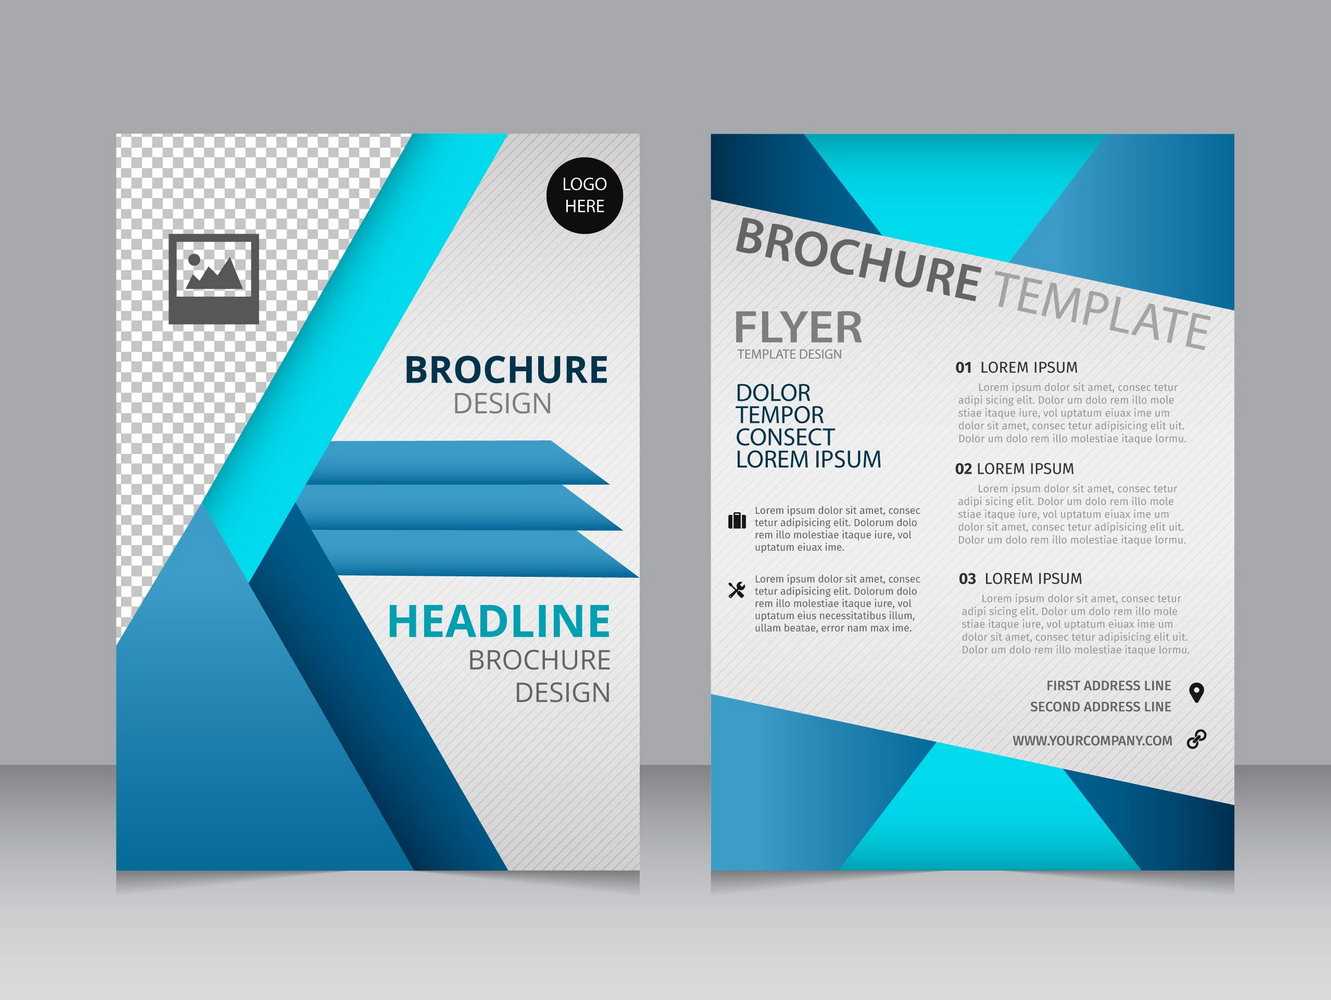 018 Brochure Templates Free Download For Microsoft Word Regarding Free Brochure Templates For Word 2010